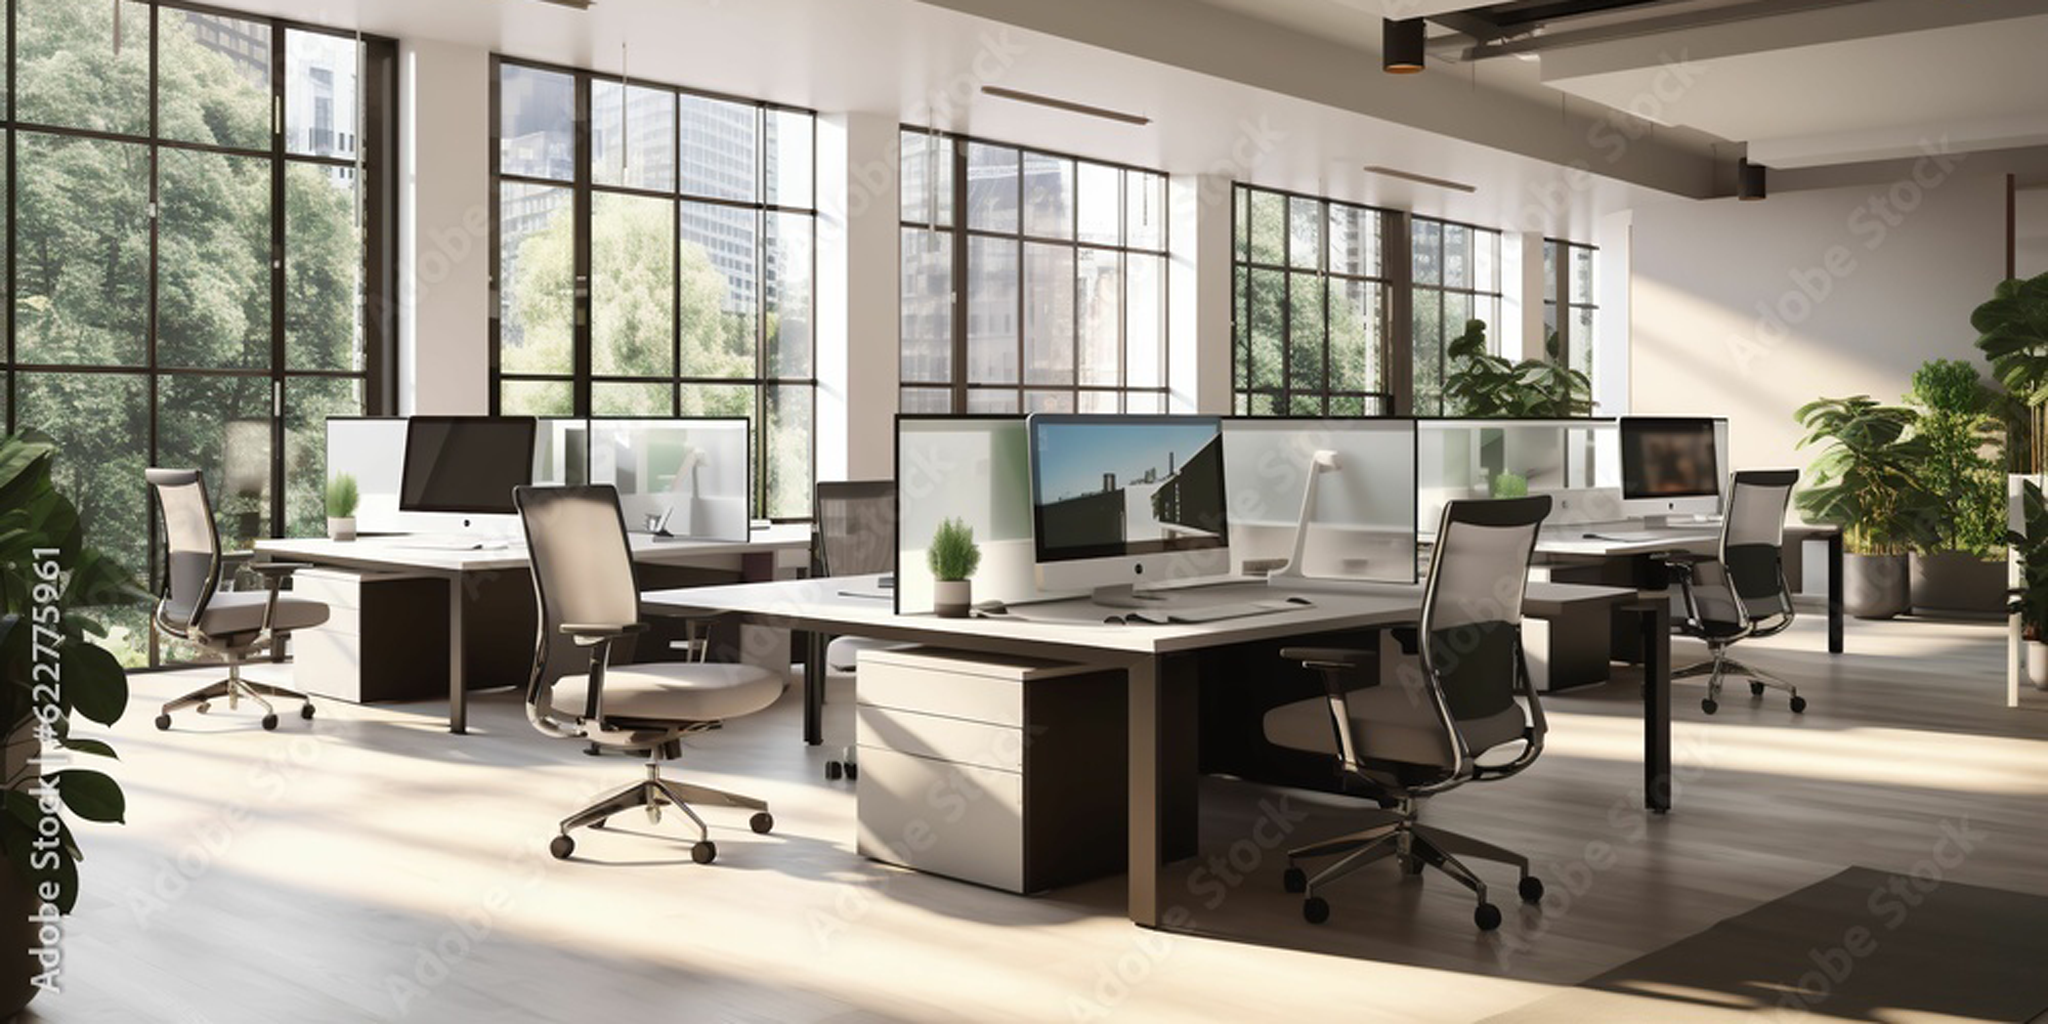 Sunny office space with rolling chairs. 